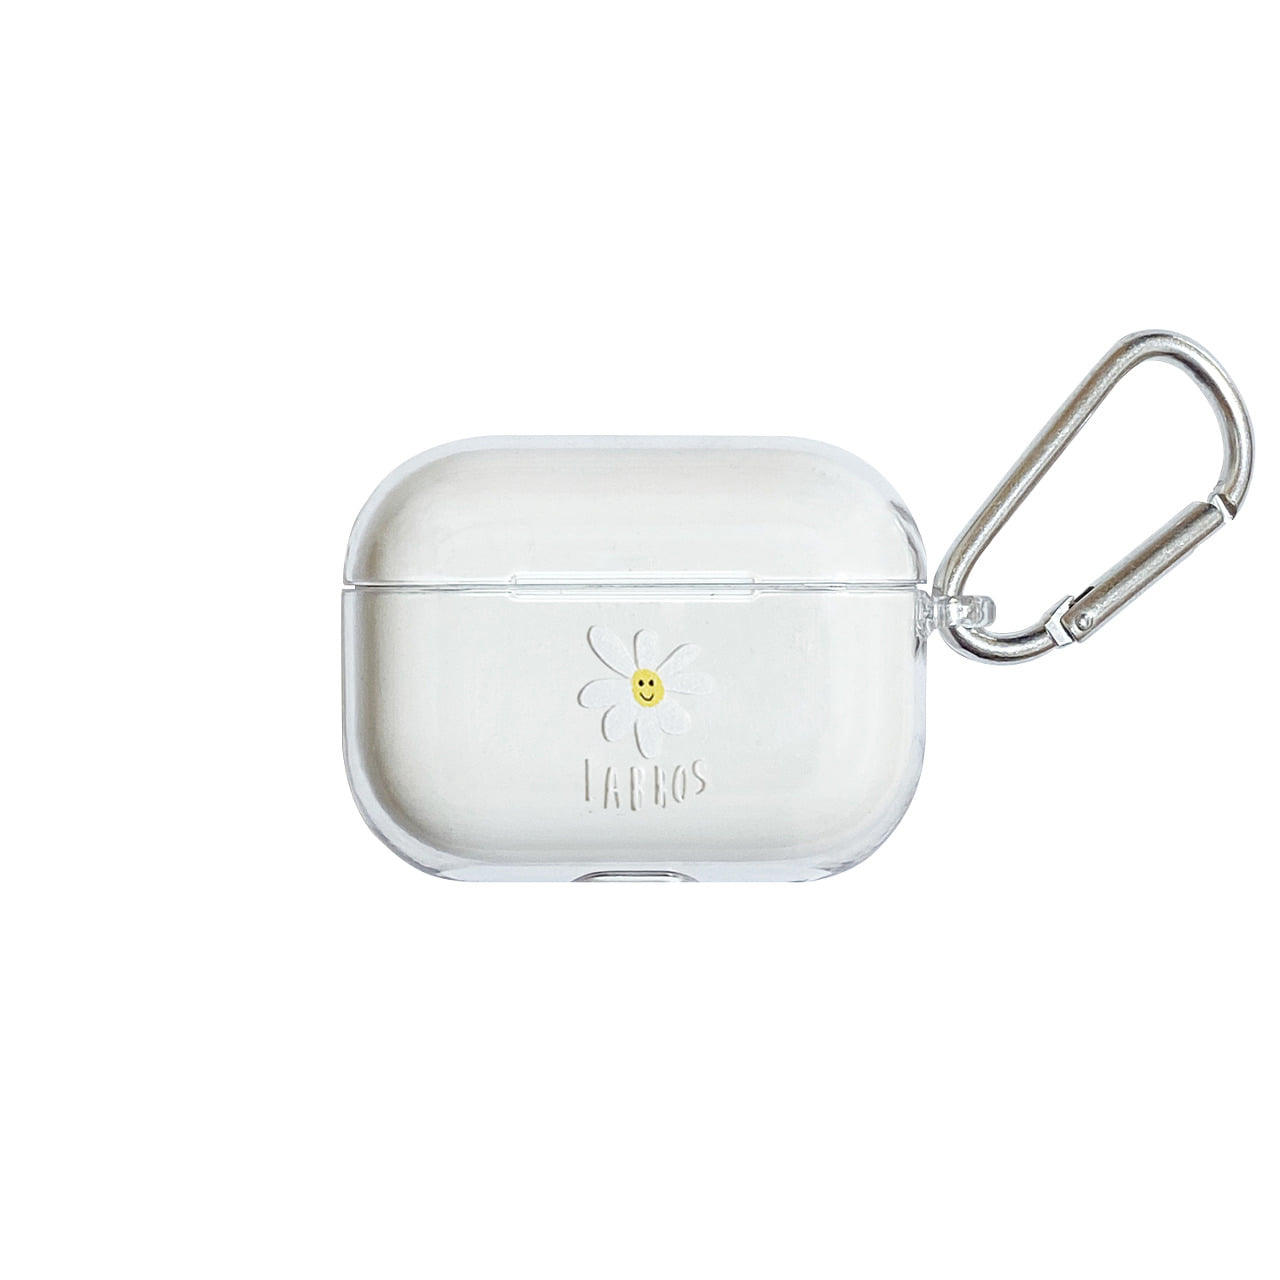 Daisy Airpods Hard Case (Clear)